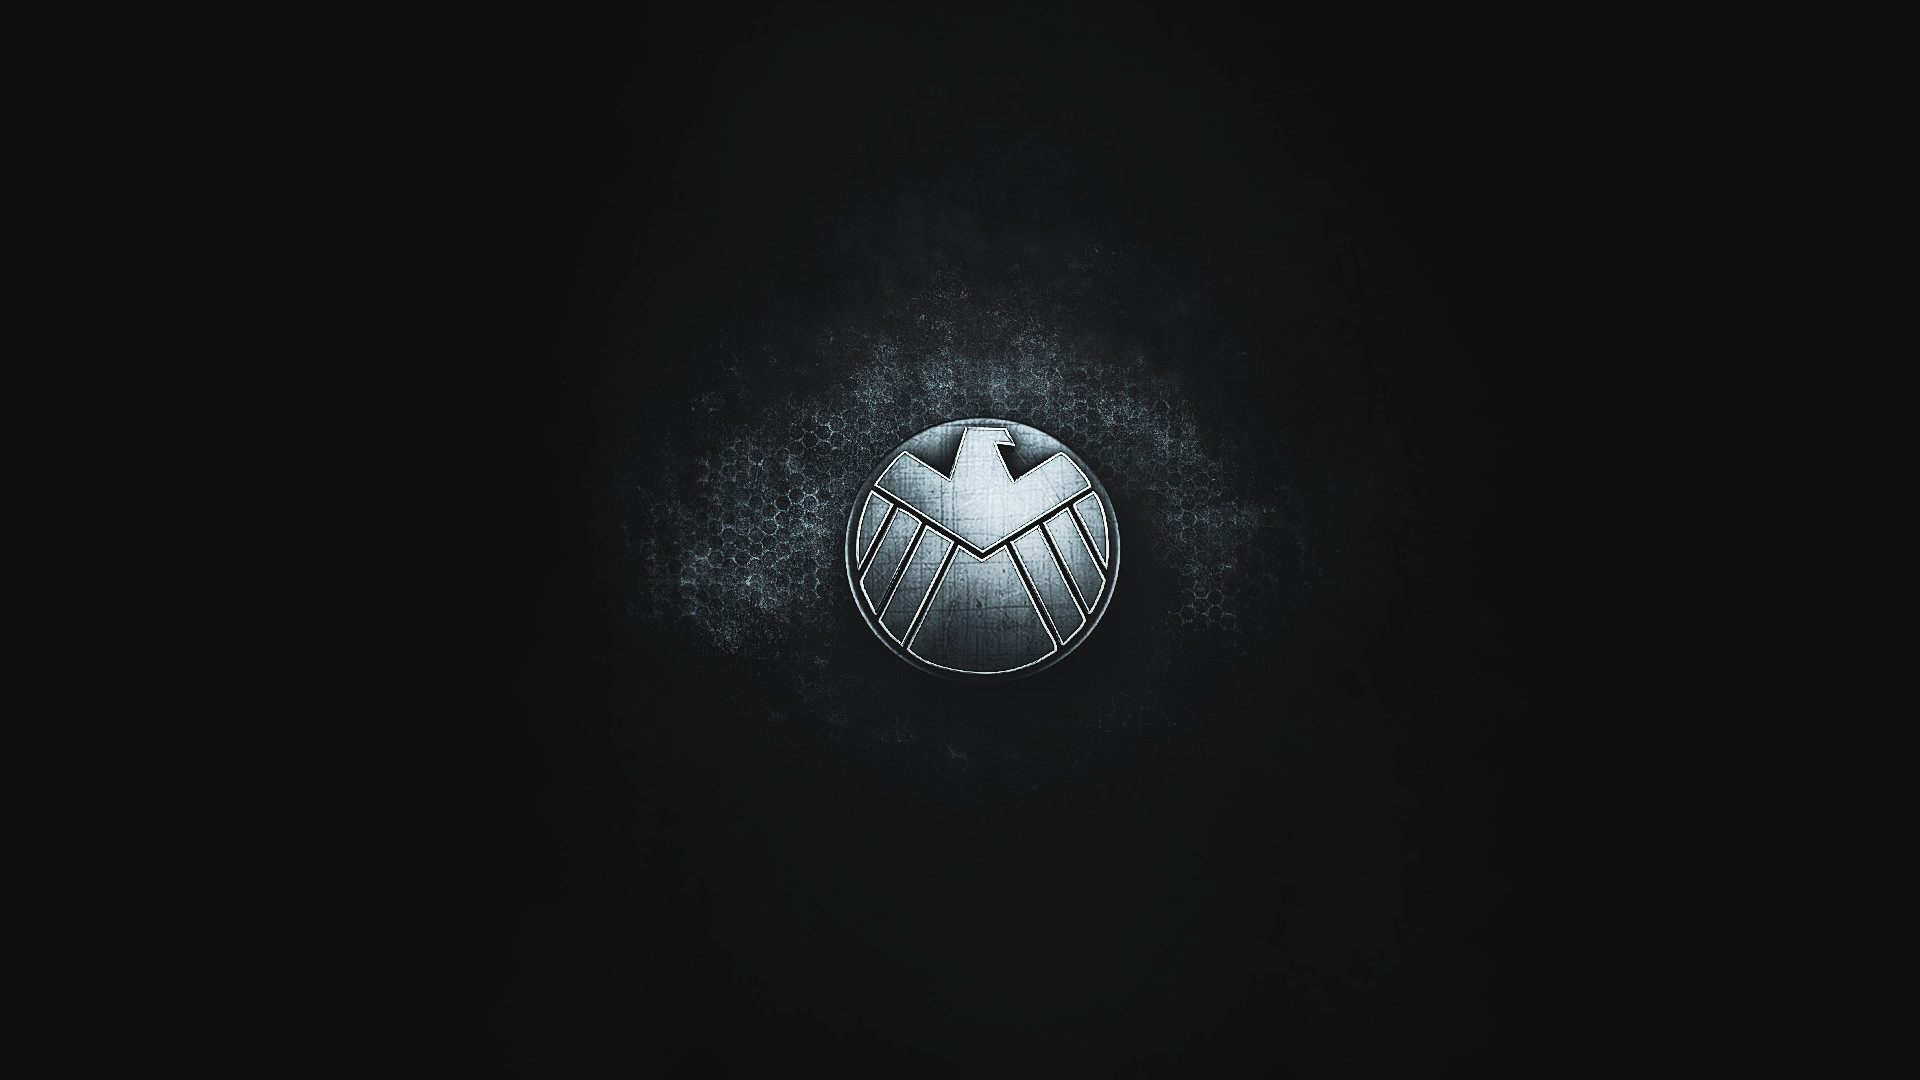 Agents of shield widescreen hd wallpapers images